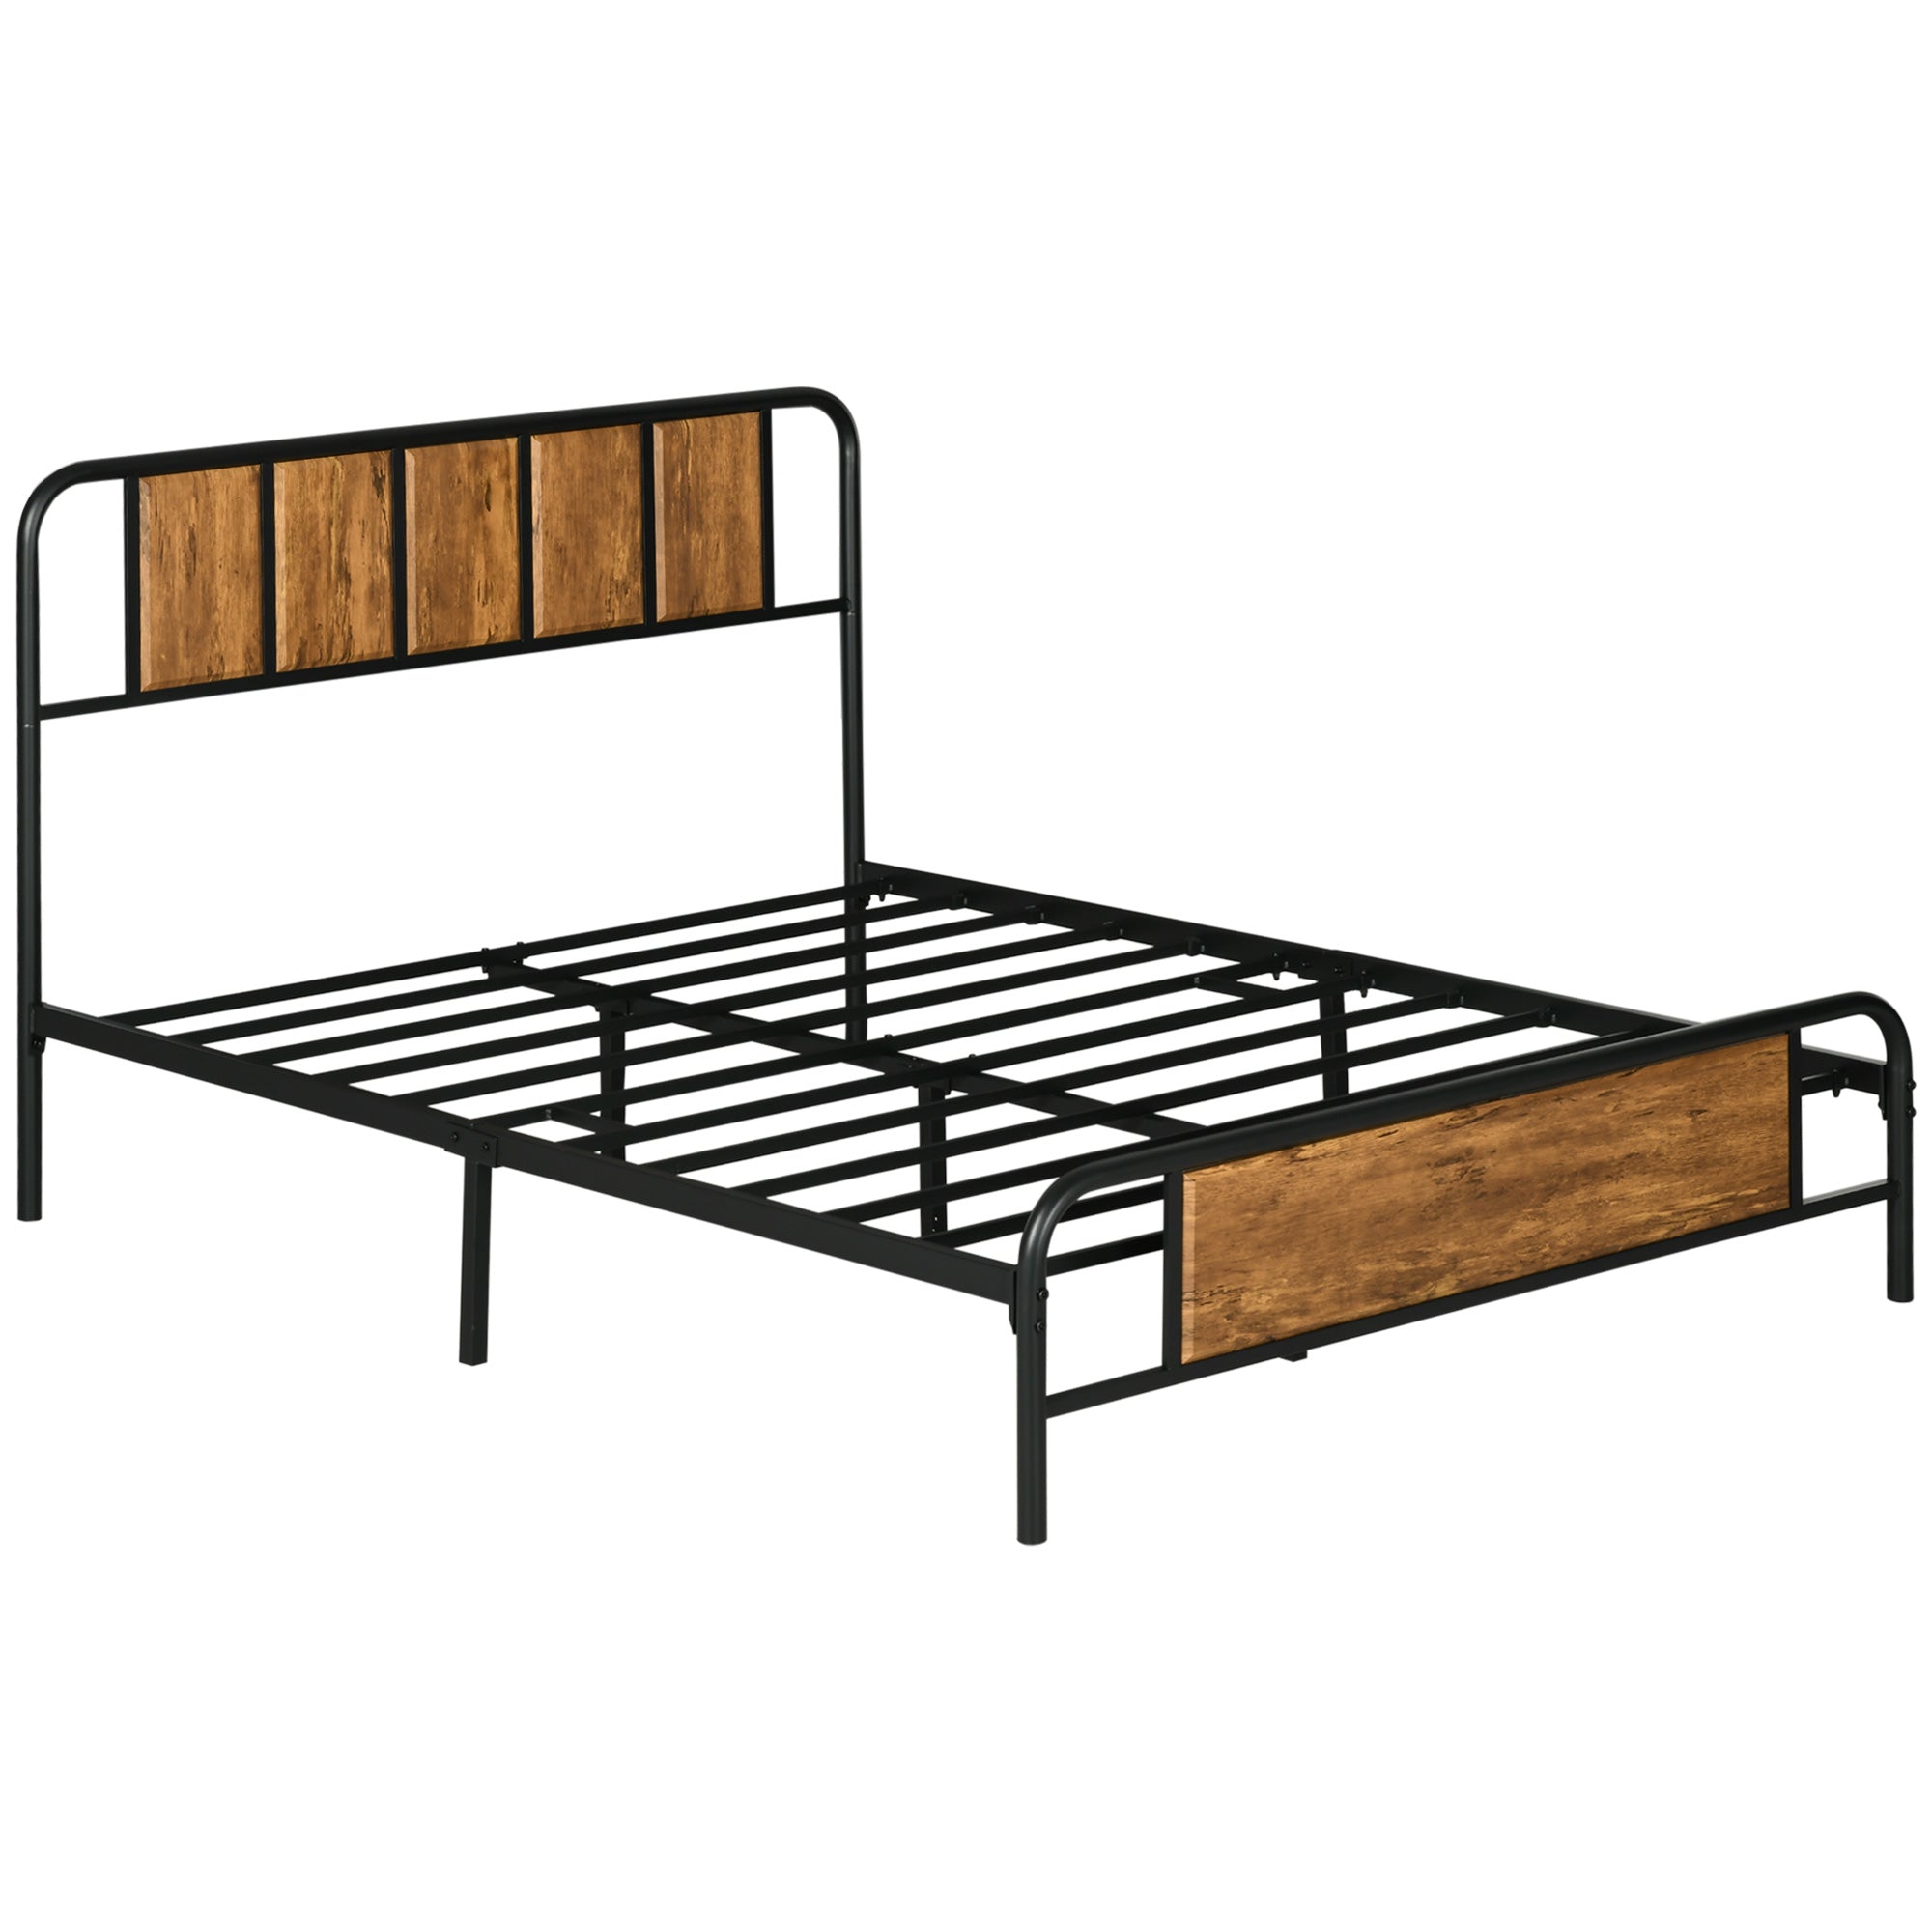 HOMCOM Double Bed Frame Steel Bed Base with Headboard 145 x 199cm Brown  | TJ Hughes